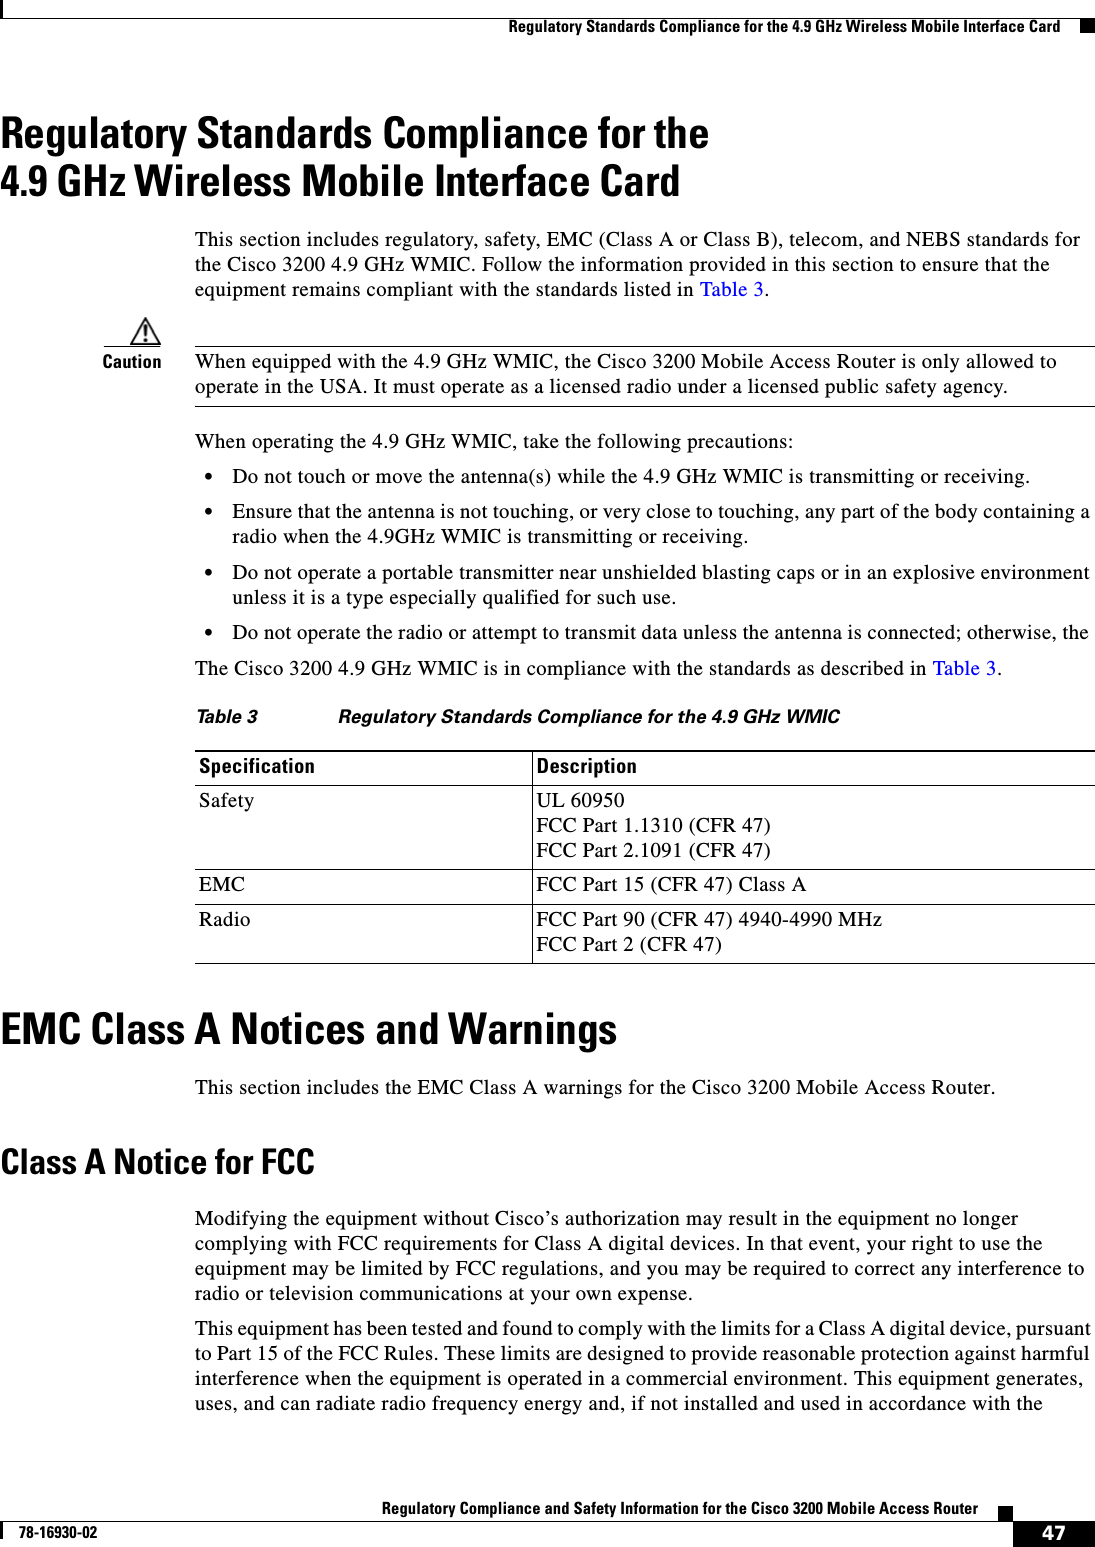 47Regulatory Compliance and Safety Information for the Cisco 3200 Mobile Access Router78-16930-02  Regulatory Standards Compliance for the 4.9 GHz Wireless Mobile Interface CardRegulatory Standards Compliance for the 4.9 GHz Wireless Mobile Interface CardThis section includes regulatory, safety, EMC (Class A or Class B), telecom, and NEBS standards for the Cisco 3200 4.9 GHz WMIC. Follow the information provided in this section to ensure that the equipment remains compliant with the standards listed in Table 3.Caution When equipped with the 4.9 GHz WMIC, the Cisco 3200 Mobile Access Router is only allowed to operate in the USA. It must operate as a licensed radio under a licensed public safety agency.When operating the 4.9 GHz WMIC, take the following precautions:•Do not touch or move the antenna(s) while the 4.9 GHz WMIC is transmitting or receiving.•Ensure that the antenna is not touching, or very close to touching, any part of the body containing a radio when the 4.9GHz WMIC is transmitting or receiving. •Do not operate a portable transmitter near unshielded blasting caps or in an explosive environment unless it is a type especially qualified for such use. •Do not operate the radio or attempt to transmit data unless the antenna is connected; otherwise, the The Cisco 3200 4.9 GHz WMIC is in compliance with the standards as described in Table 3.EMC Class A Notices and WarningsThis section includes the EMC Class A warnings for the Cisco 3200 Mobile Access Router.Class A Notice for FCCModifying the equipment without Cisco’s authorization may result in the equipment no longer complying with FCC requirements for Class A digital devices. In that event, your right to use the equipment may be limited by FCC regulations, and you may be required to correct any interference to radio or television communications at your own expense.This equipment has been tested and found to comply with the limits for a Class A digital device, pursuant to Part 15 of the FCC Rules. These limits are designed to provide reasonable protection against harmful interference when the equipment is operated in a commercial environment. This equipment generates, uses, and can radiate radio frequency energy and, if not installed and used in accordance with the Table 3 Regulatory Standards Compliance for the 4.9 GHz WMICSpecification DescriptionSafety UL 60950FCC Part 1.1310 (CFR 47)FCC Part 2.1091 (CFR 47)EMC FCC Part 15 (CFR 47) Class ARadio FCC Part 90 (CFR 47) 4940-4990 MHzFCC Part 2 (CFR 47)